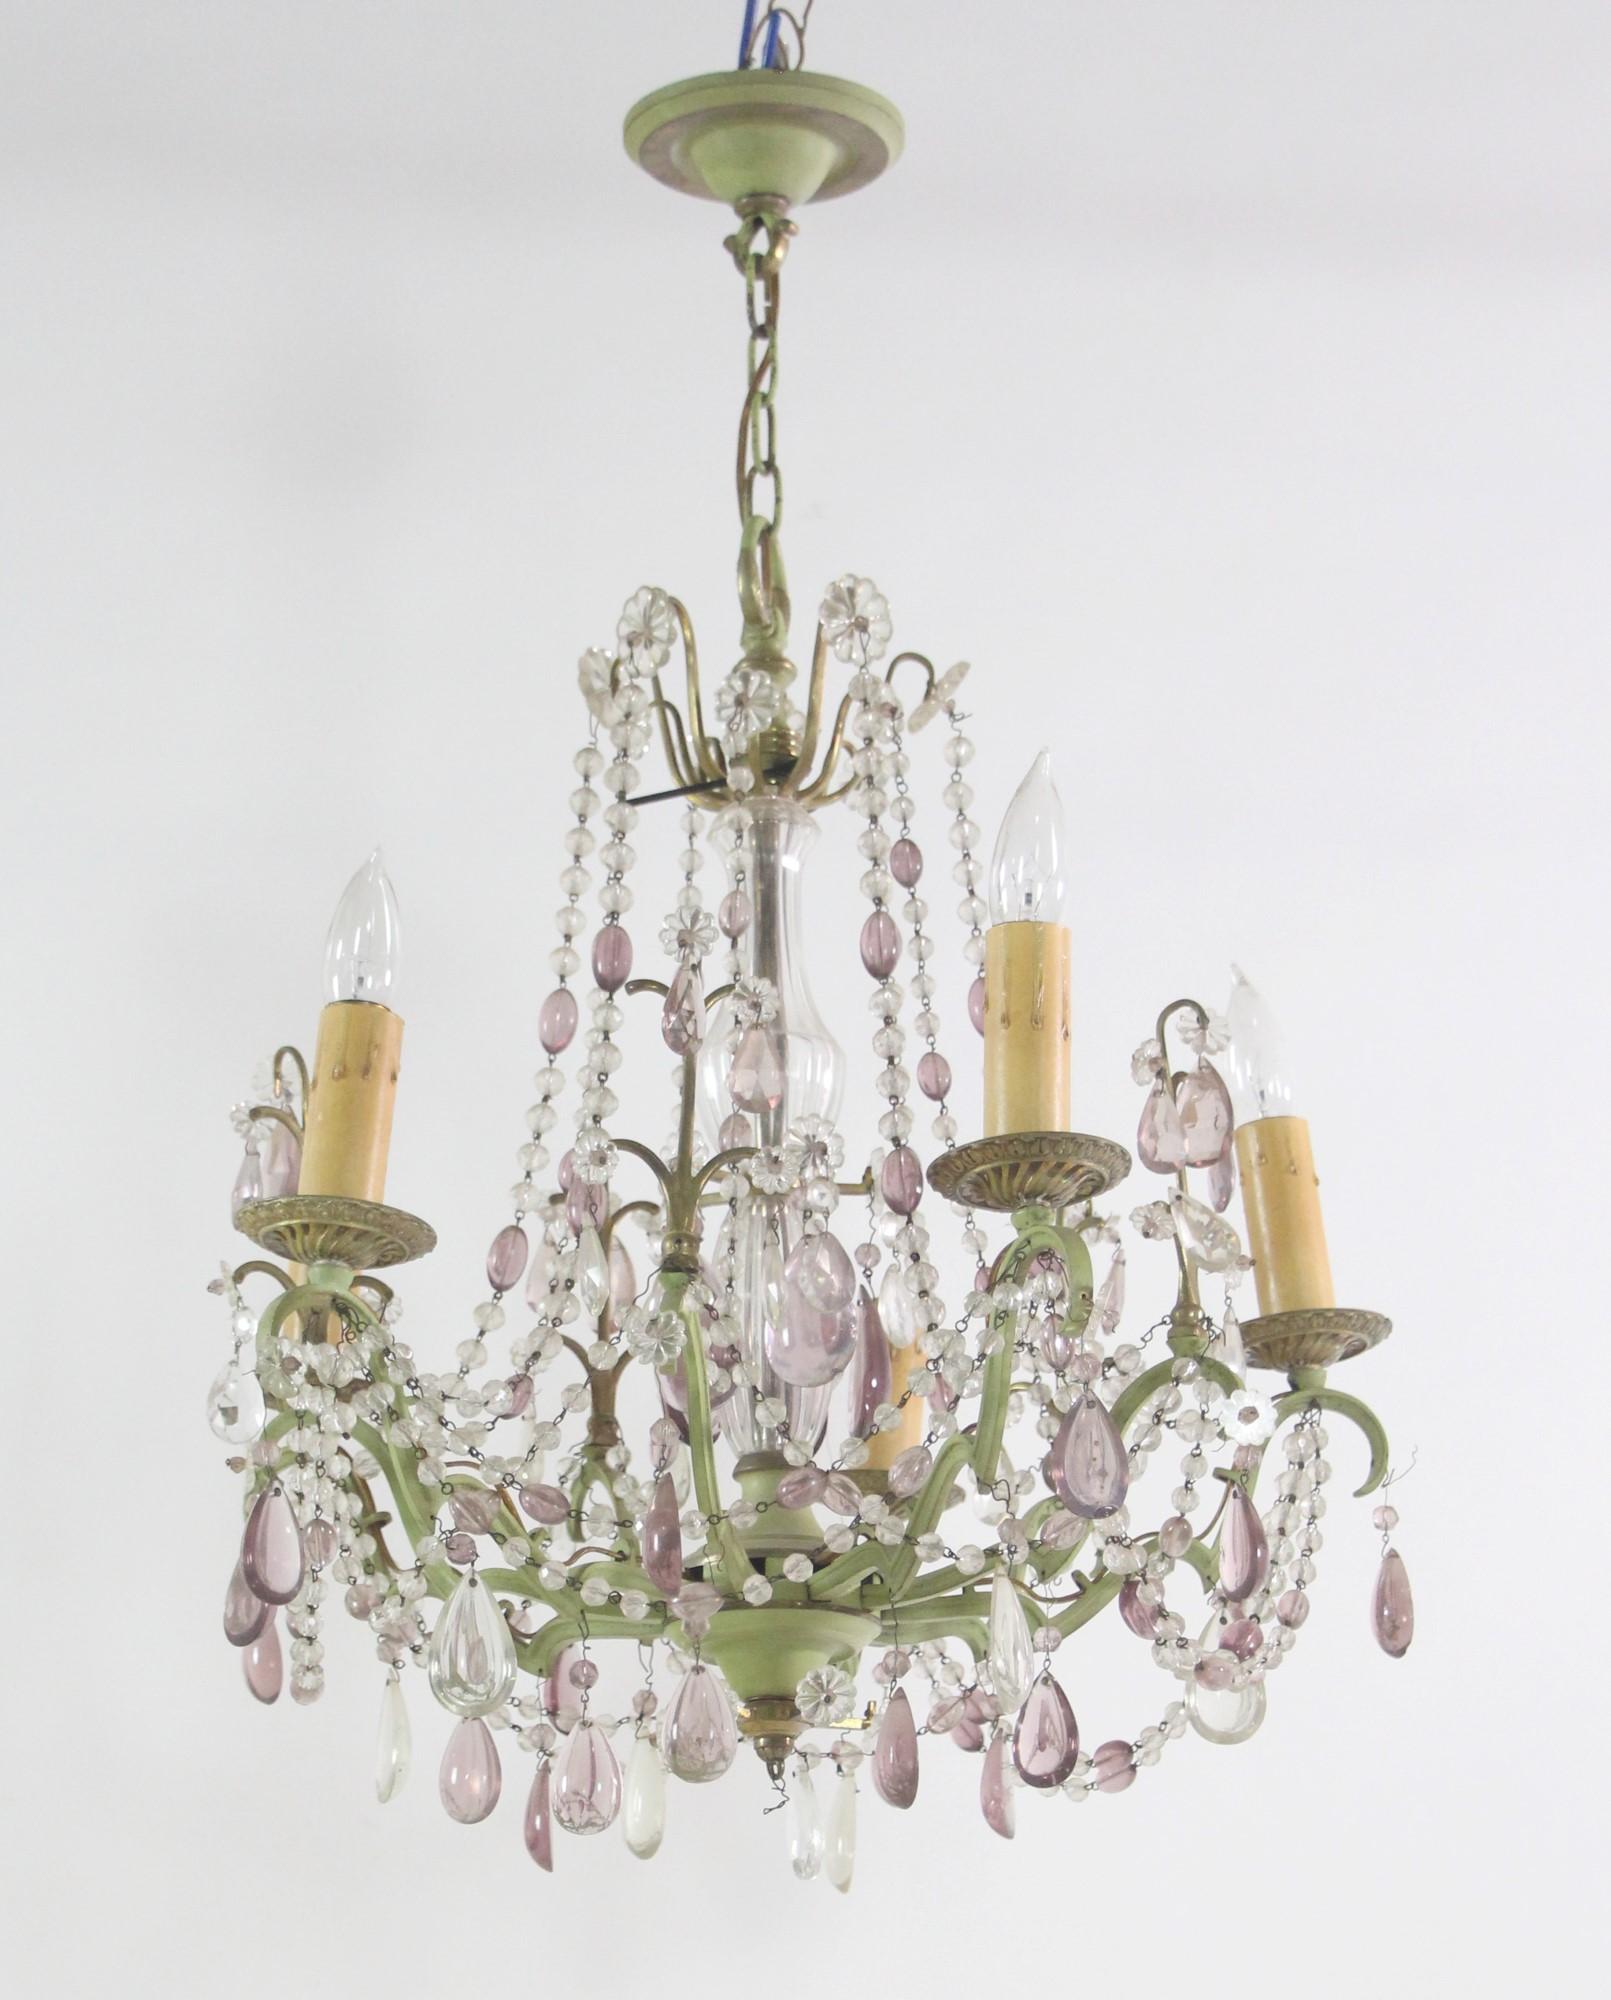 Italian 5-arm chandelier adorned with clear and amethyst beading and tear drop crystals. This elegant 1970's chandelier also has a green hand painted aluminum frame and glass flower rosettes. Price includes rewiring. Please note, this item is